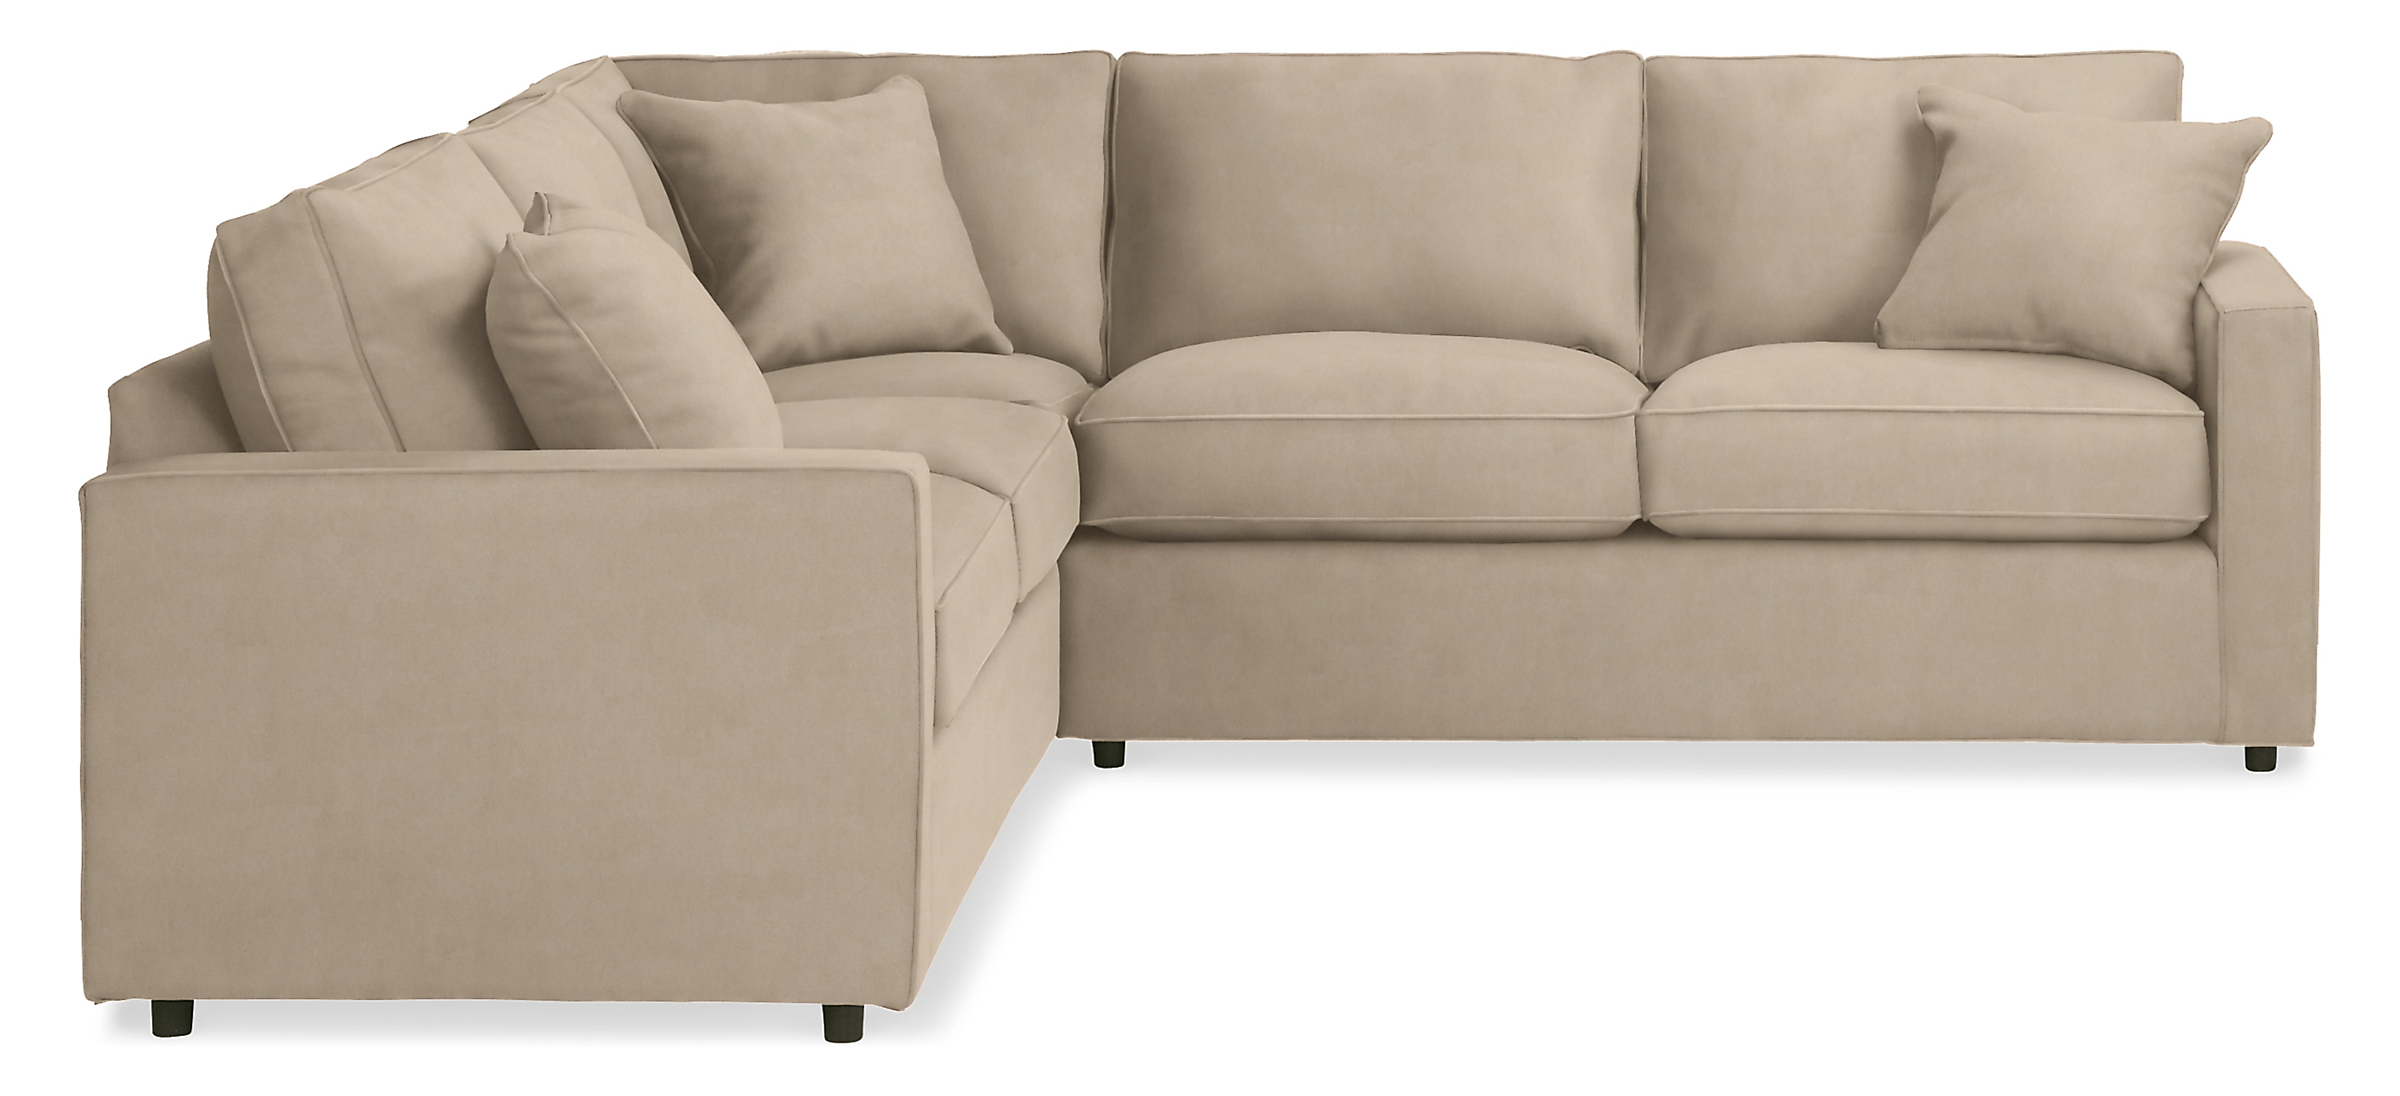 York 103x103" Three-Piece Sectional in Banks Natural